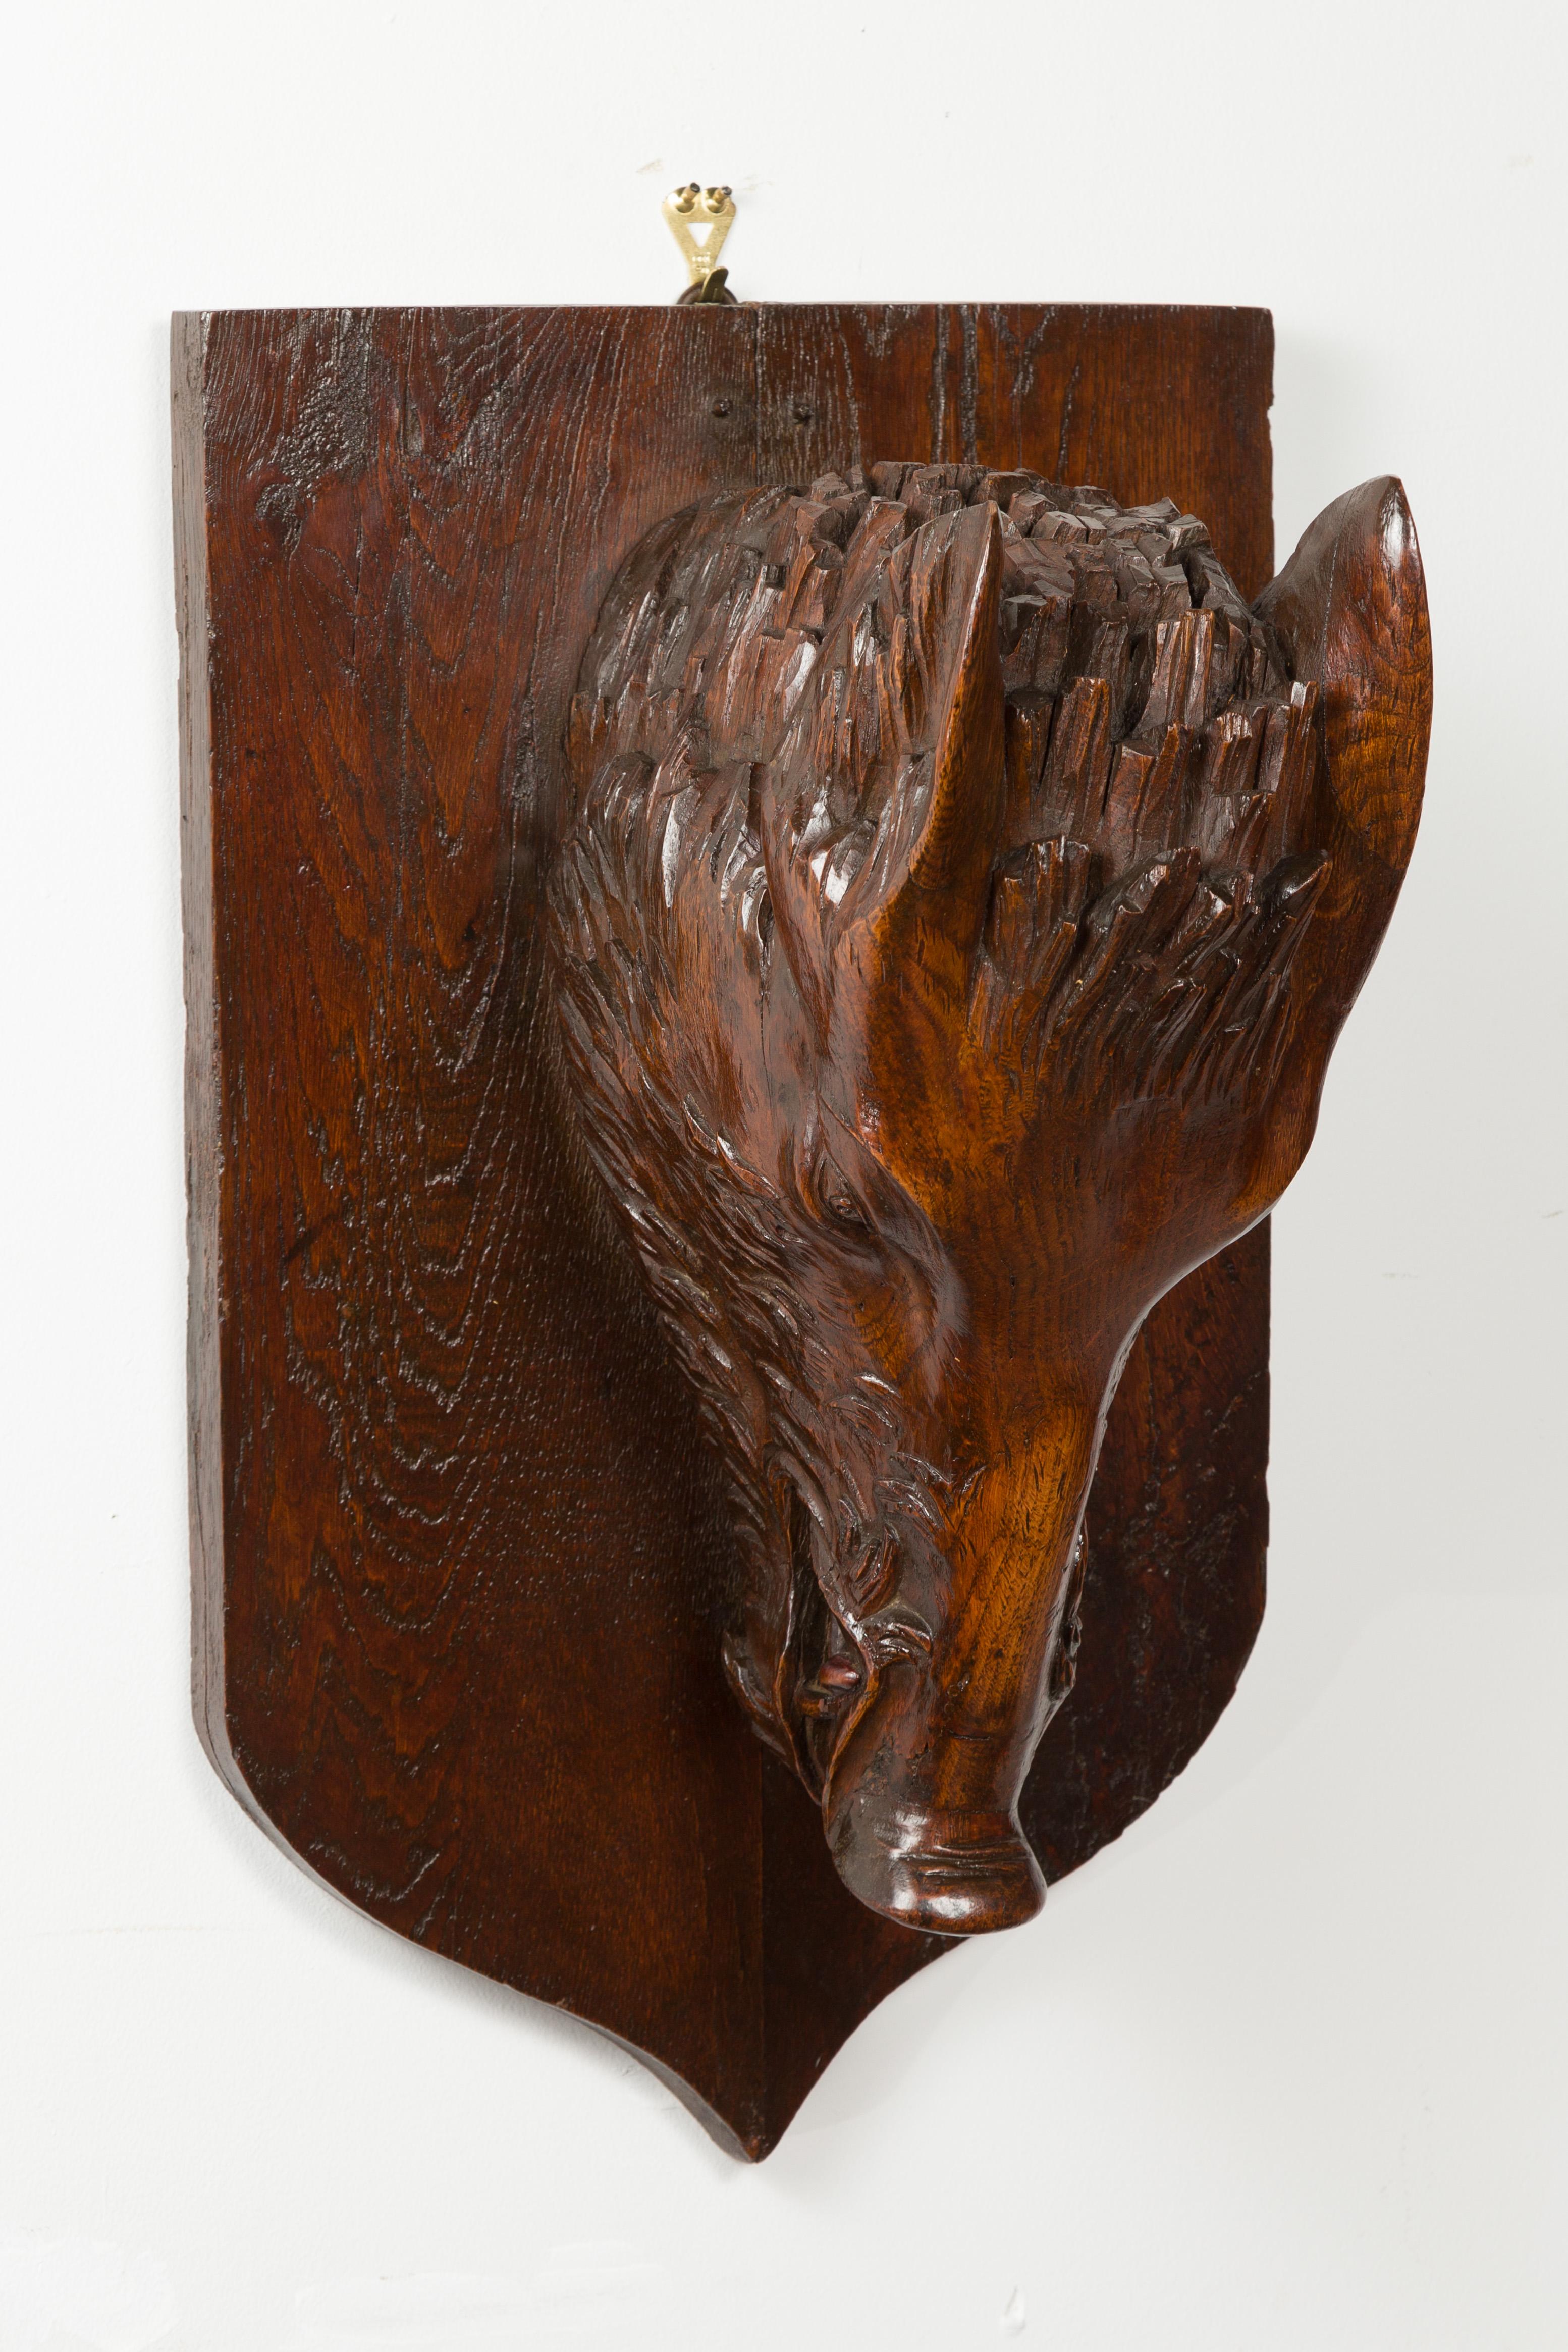 A French carved wooden boar's head from the early 20th century, on shield back. Created in France during the first quarter of the 20th century, this mounted sculpture depicts a boar's head carved to be seen from below. Showcasing nice details and